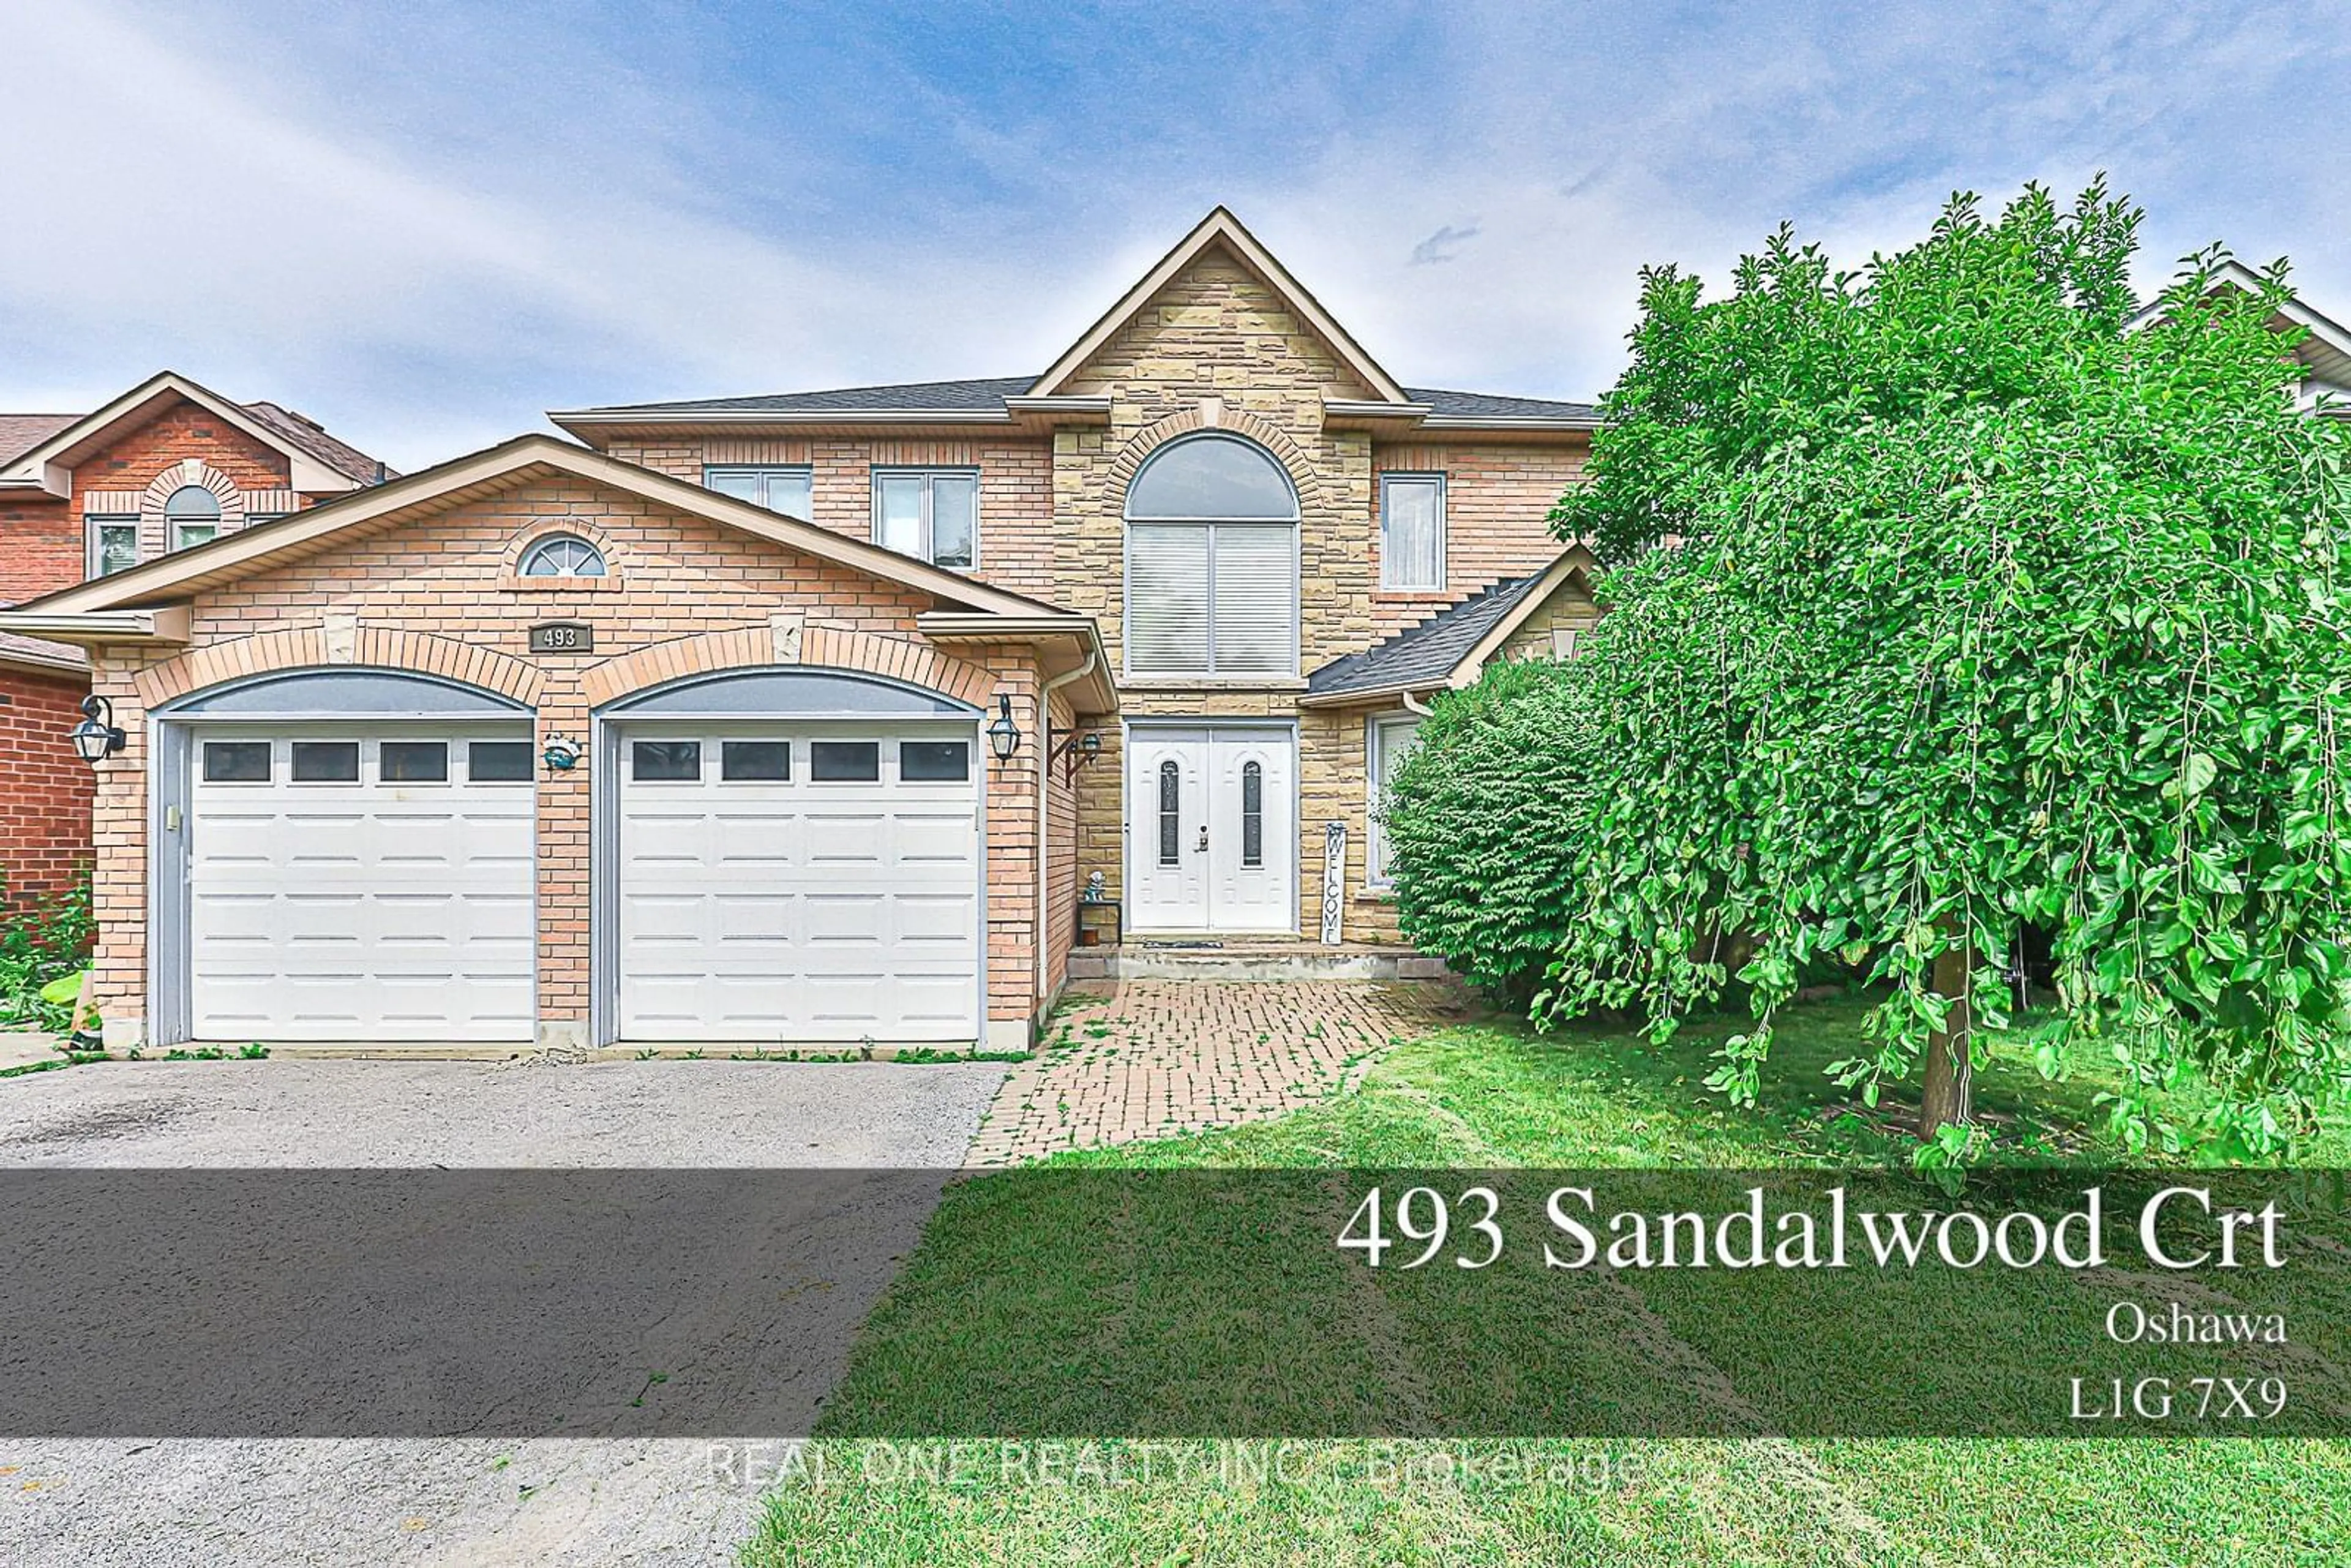 Frontside or backside of a home for 493 sandalwood Crt, Oshawa Ontario L1G 7X9